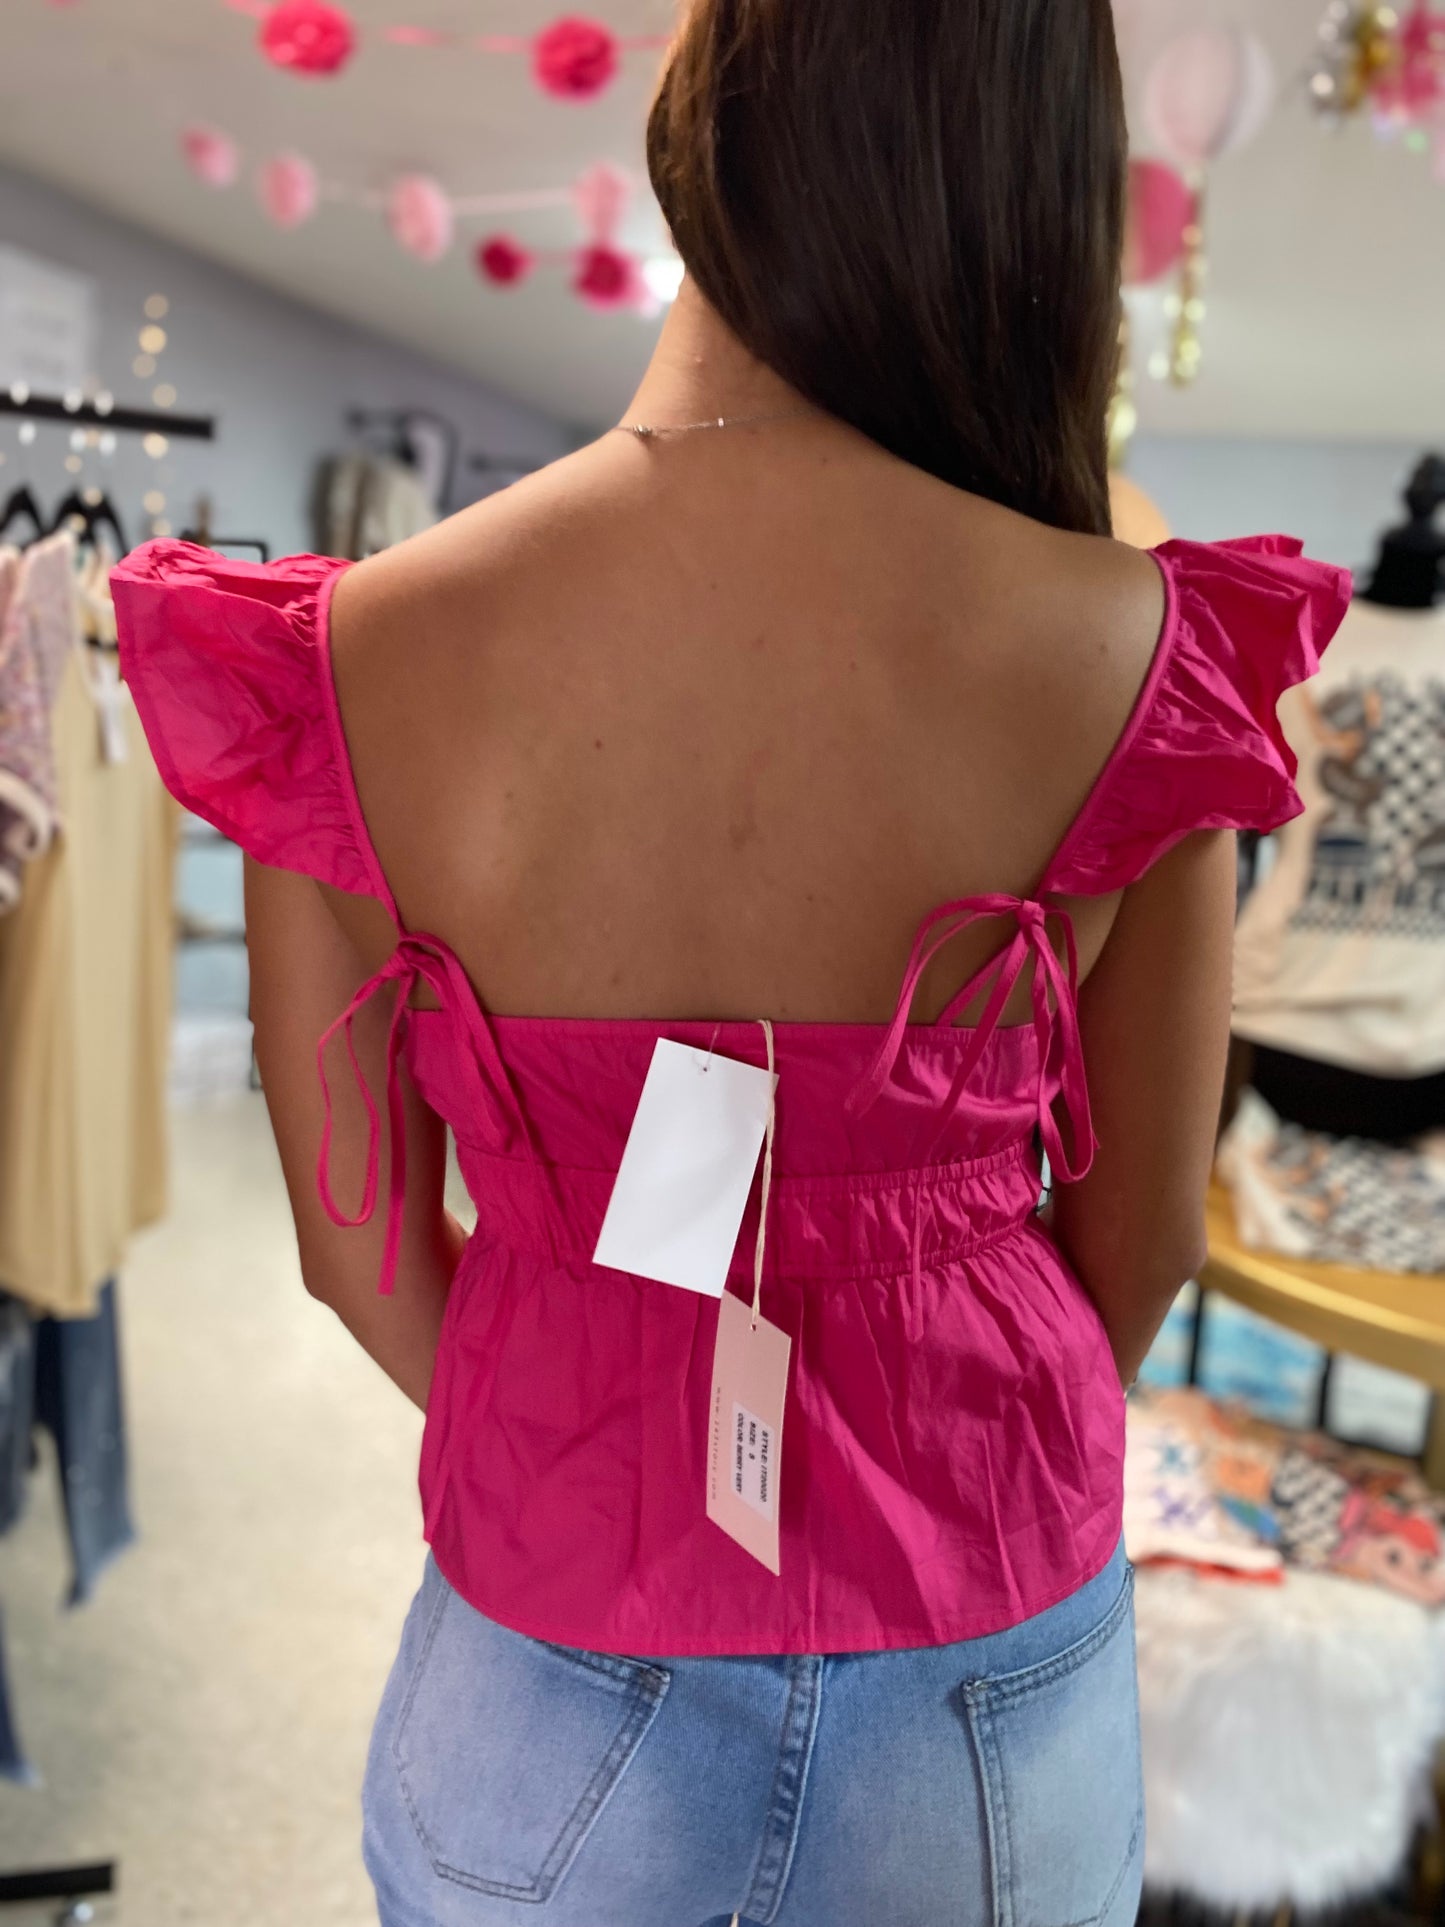 She’s Going Places Pink Ruffled Top